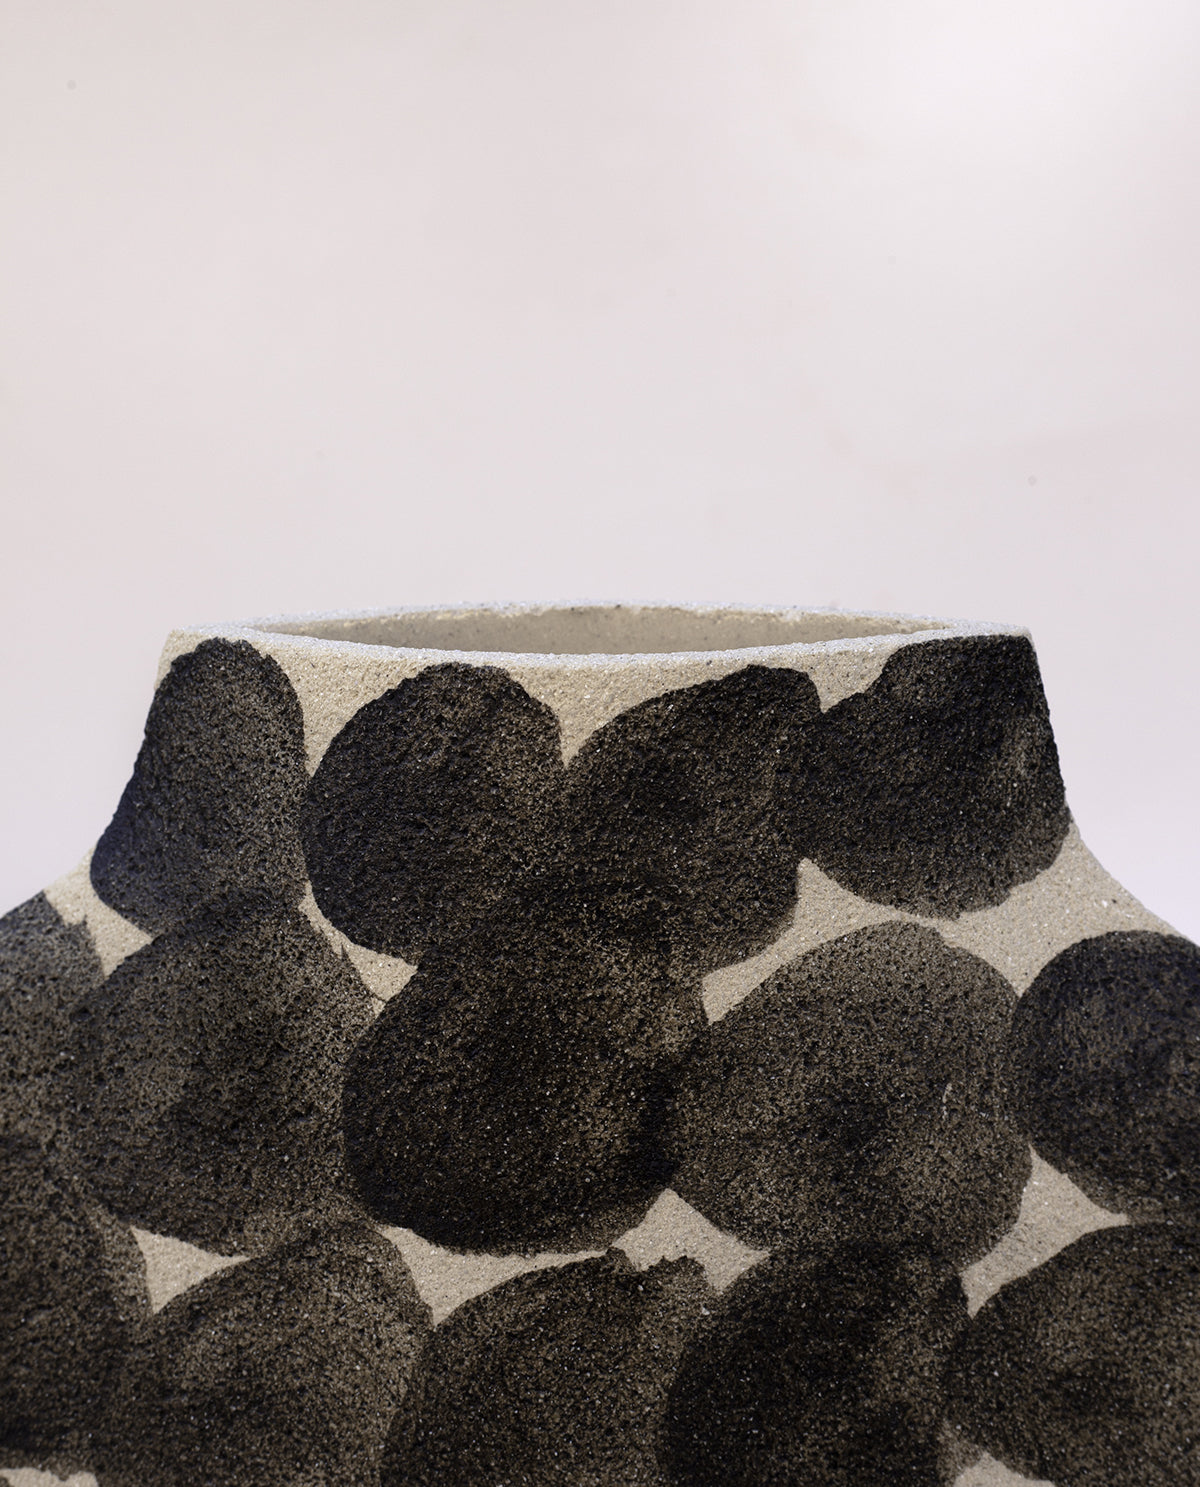 Hand-painted abstract vase by INI CERAMIQUE with geometric round patterns and textured finish